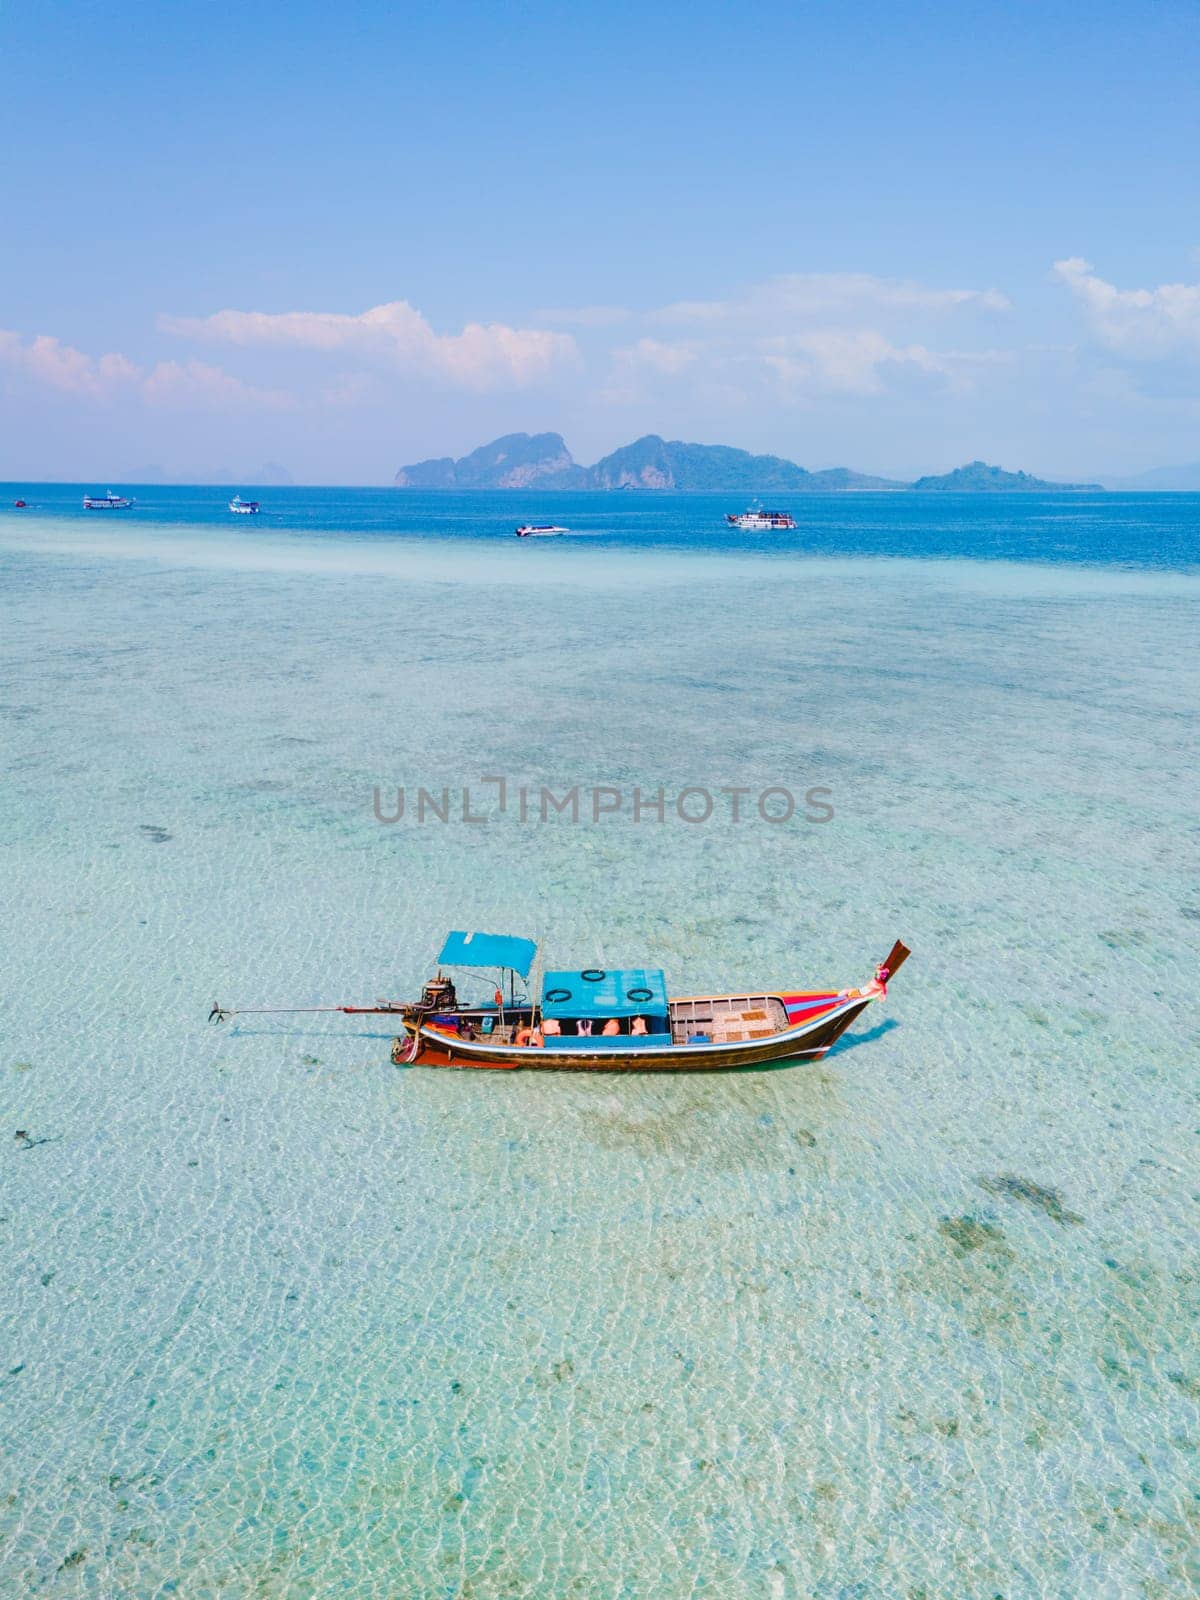 longtail boat in the blue green turqouse colored ocean with clear water at Koh Kradan a tropical island in Trang Thailand